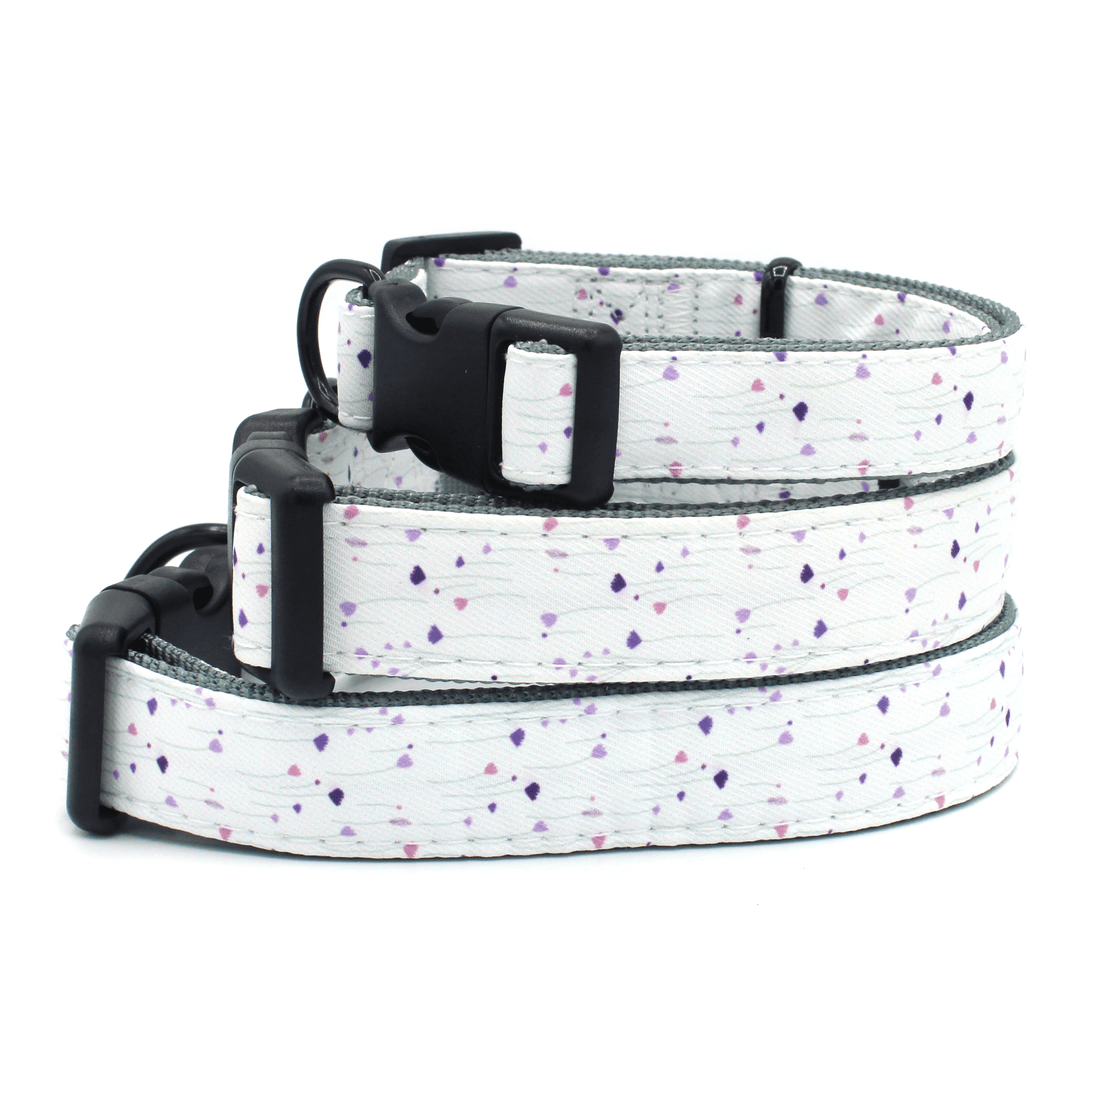 three stacked high quality wildflower pattern dog collars